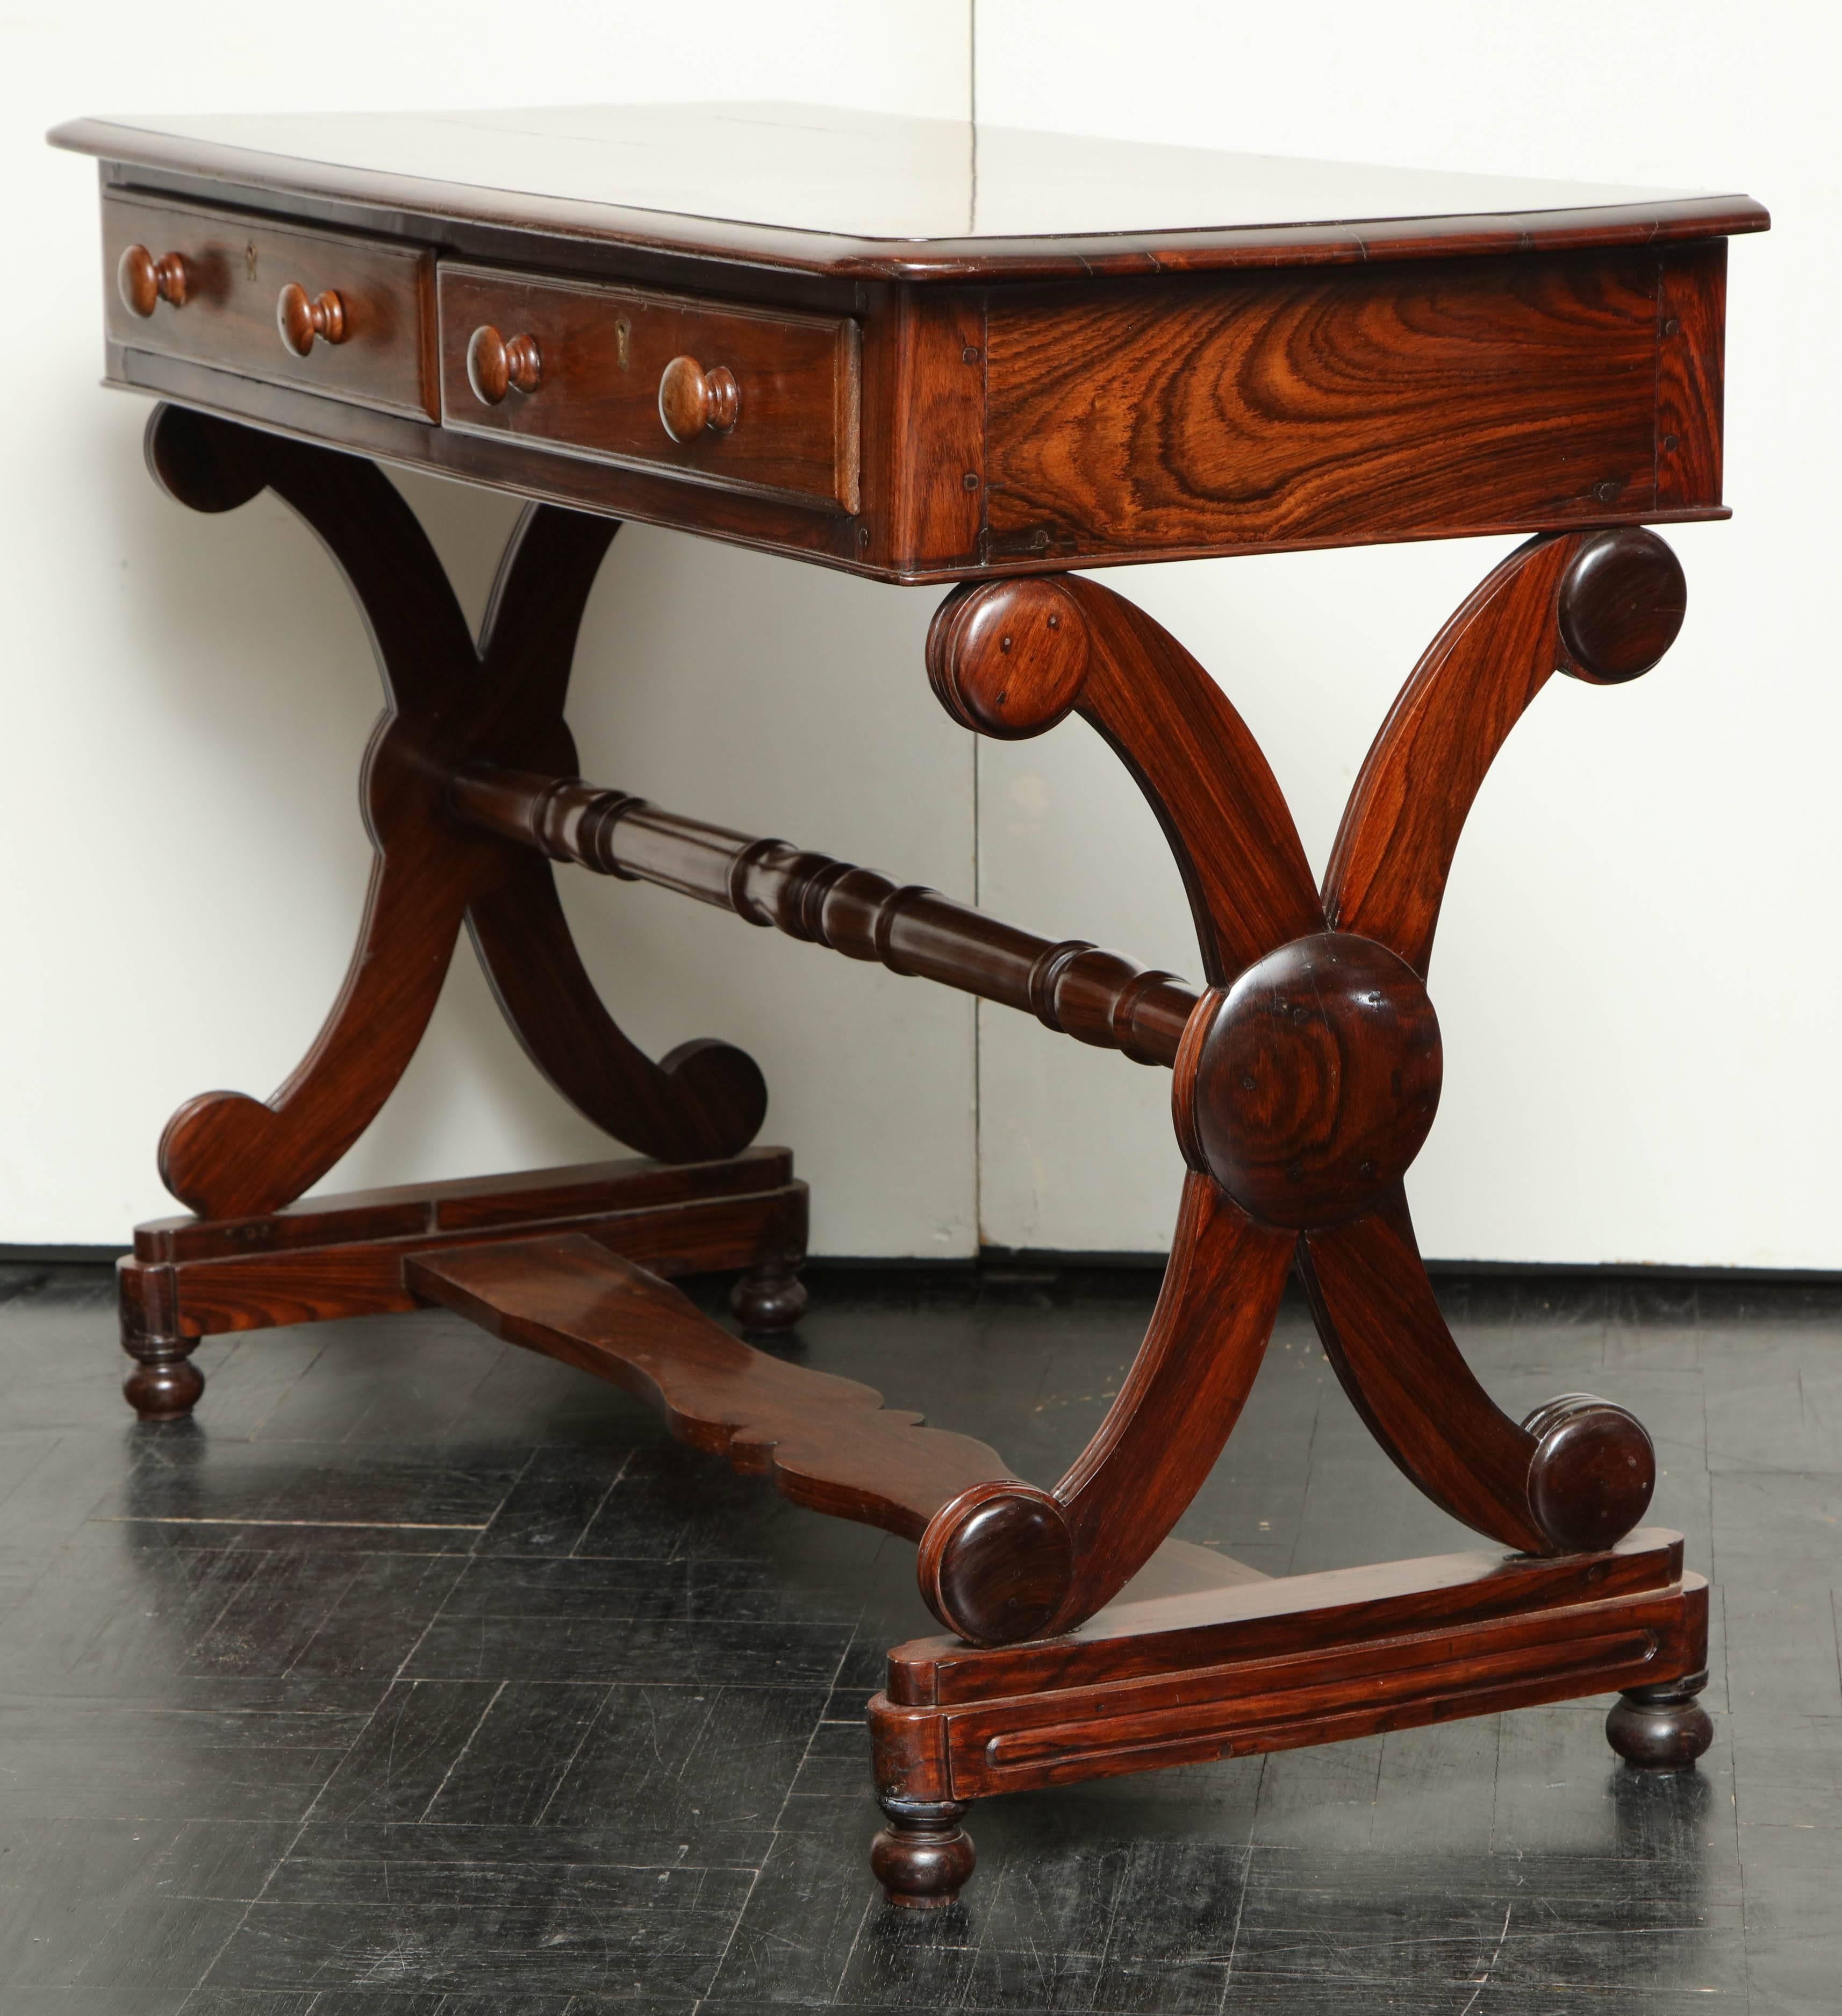 19th century, rosewood Anglo-Indian sofa table, polished and molded top above two drawers in apron, ivory escutcheon, trestle base joined by turned stretcher X-shaped sides.